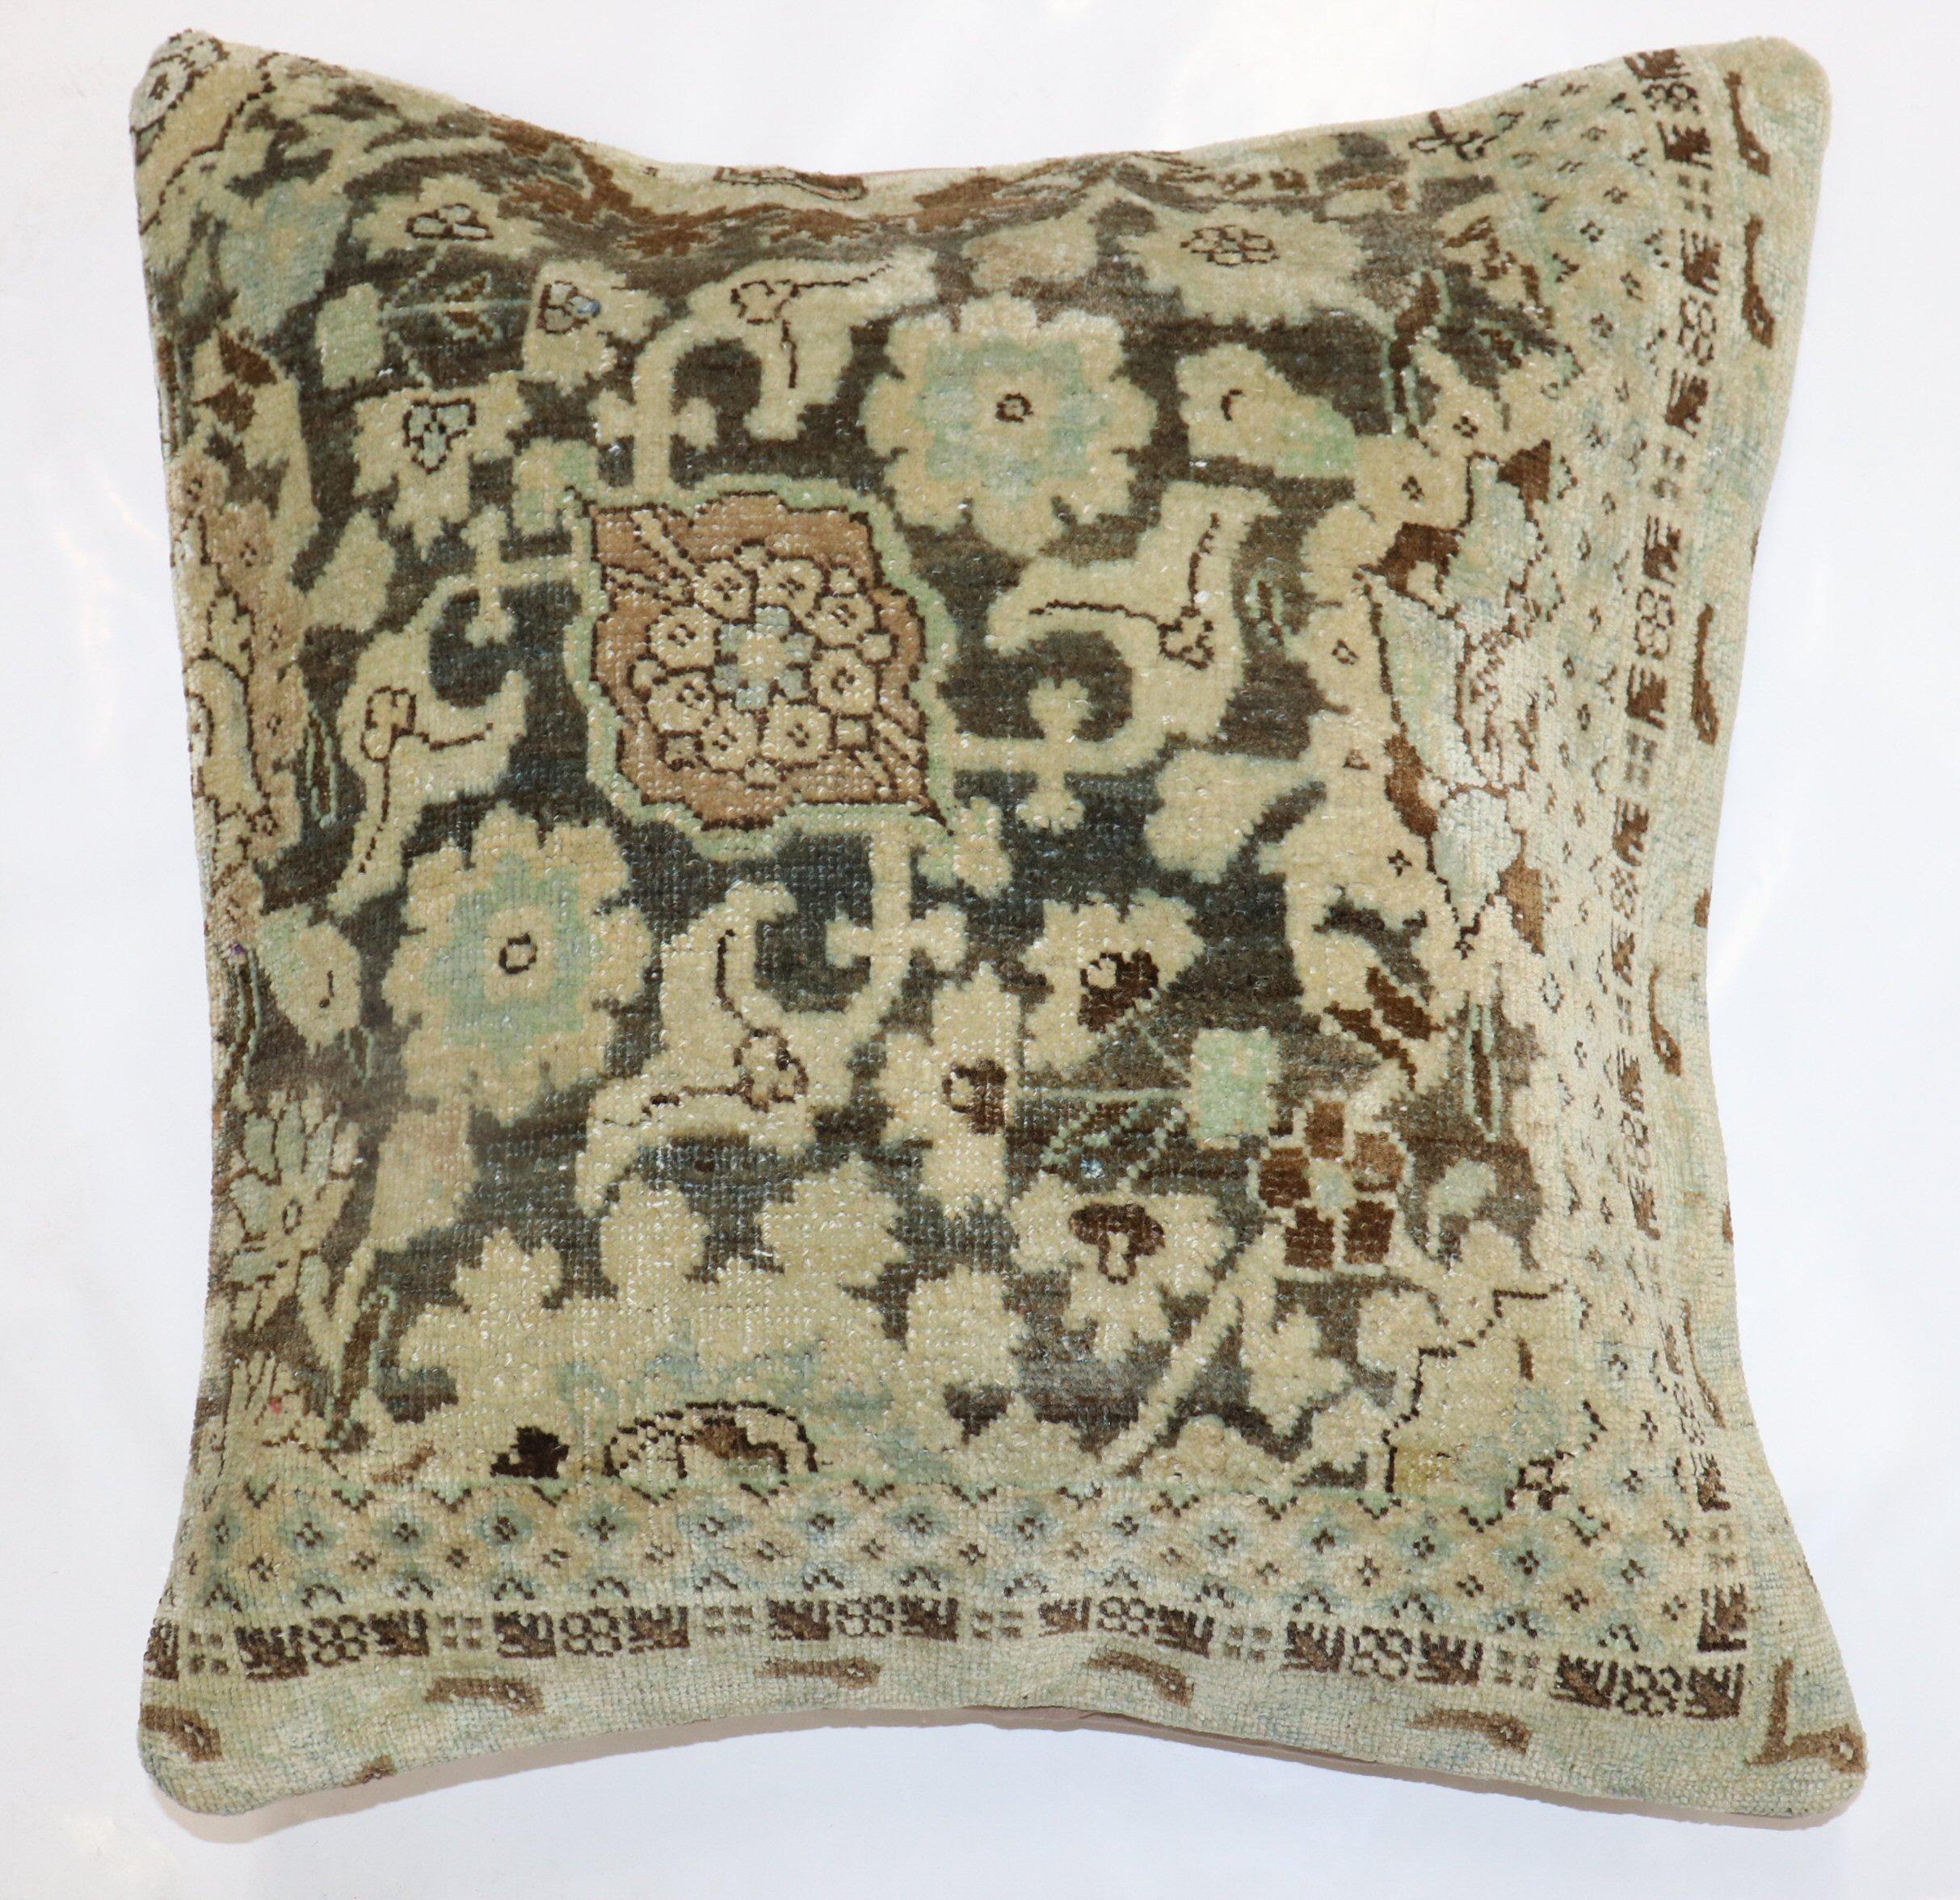 Large size Pillow made from a Persian Lilihan rug. zipper closure and poly-fill insert provided.

Measures: 23'' x 23''.